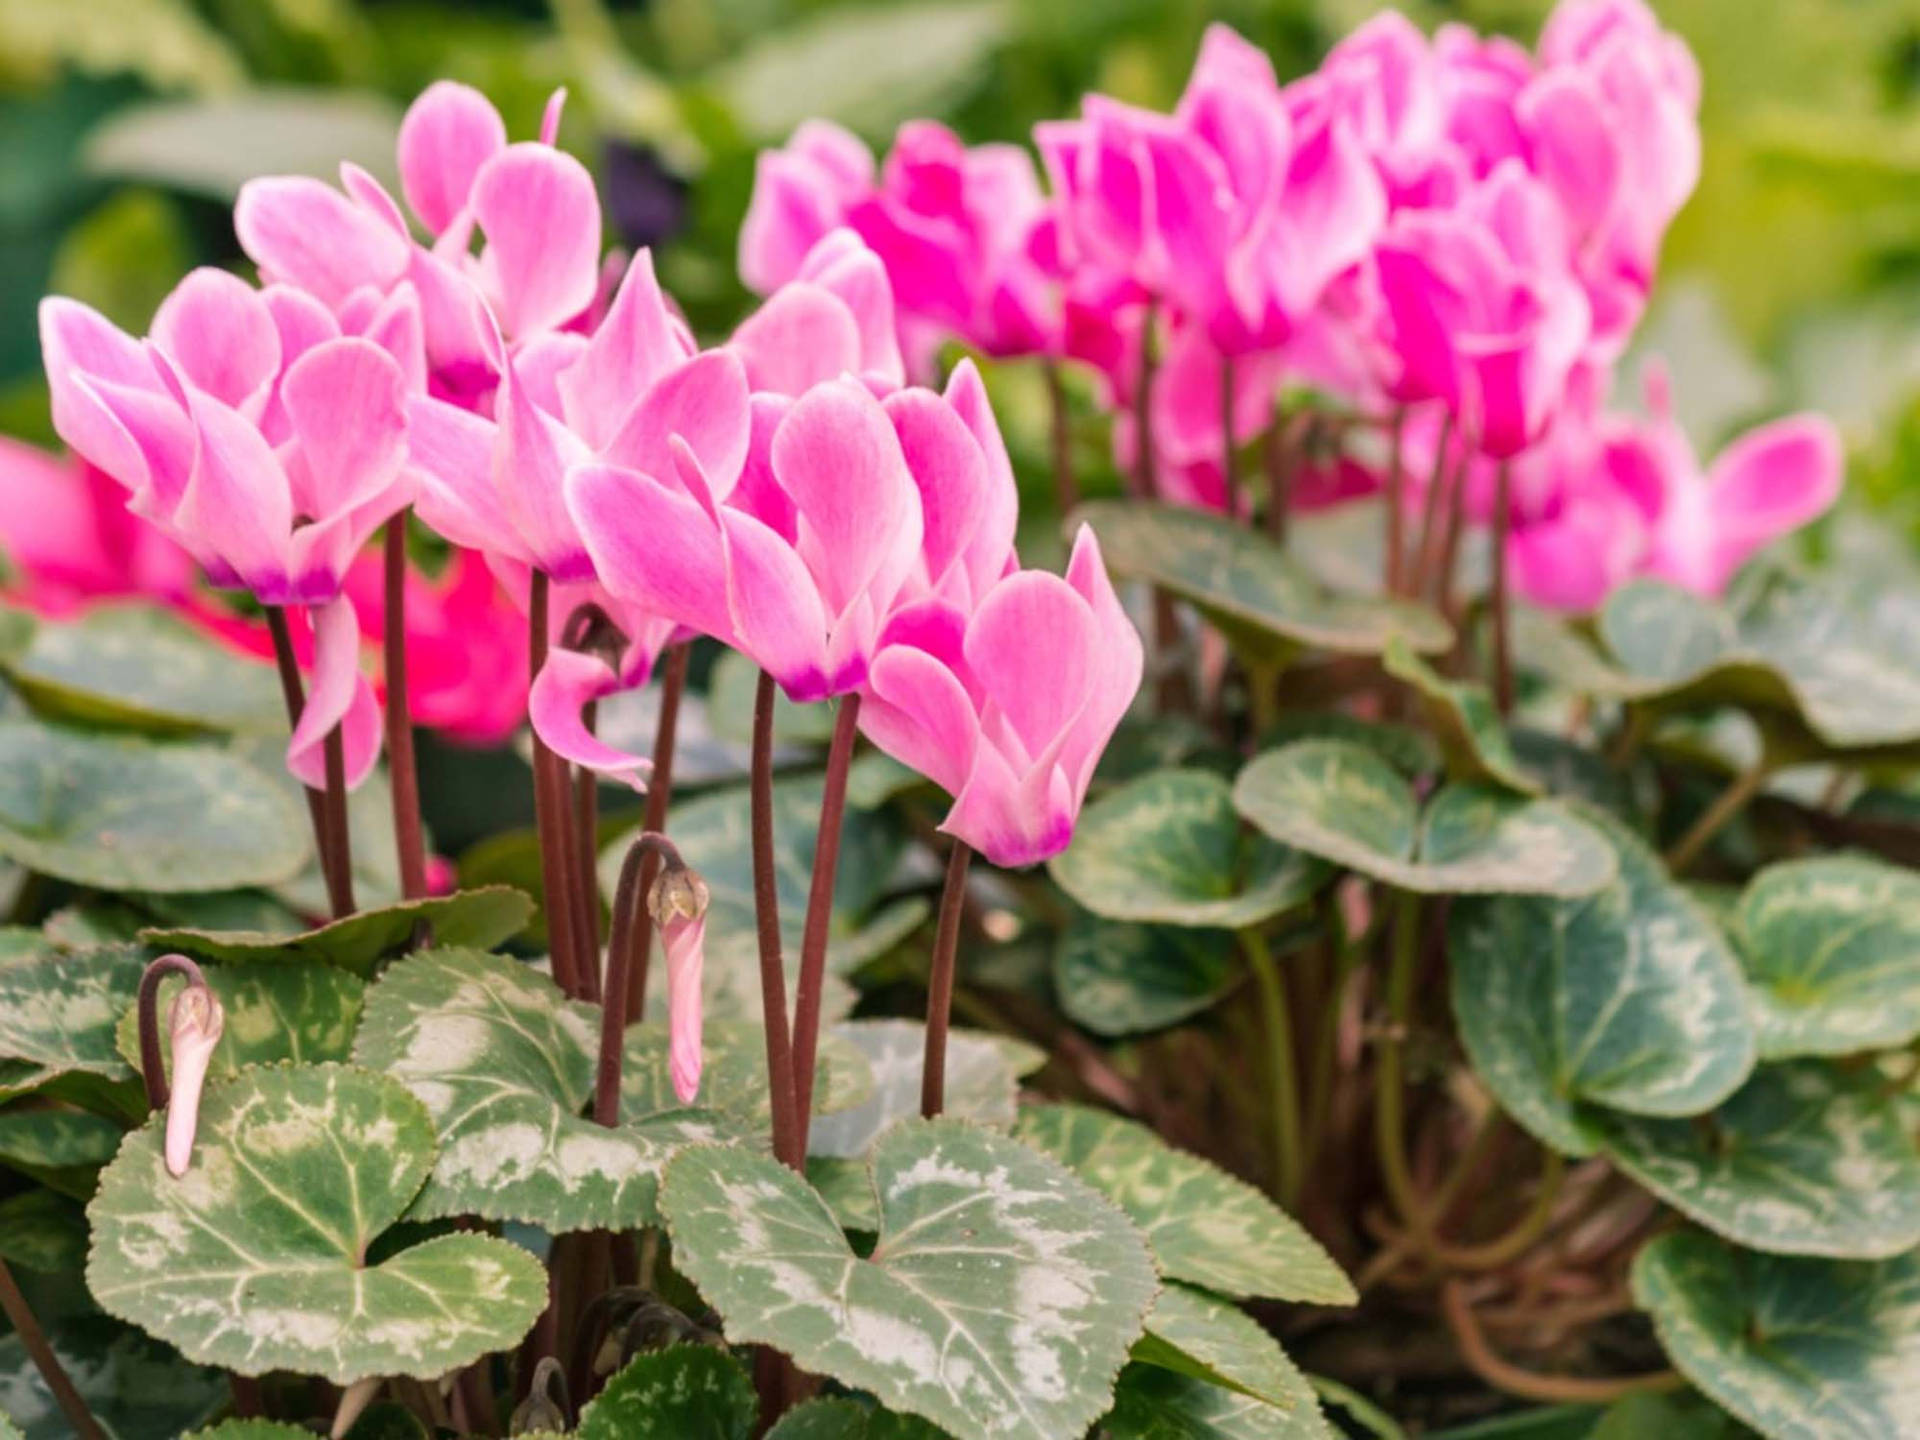 Free Cyclamen Pictures , [100+] Cyclamen Pictures for FREE | Wallpapers.com